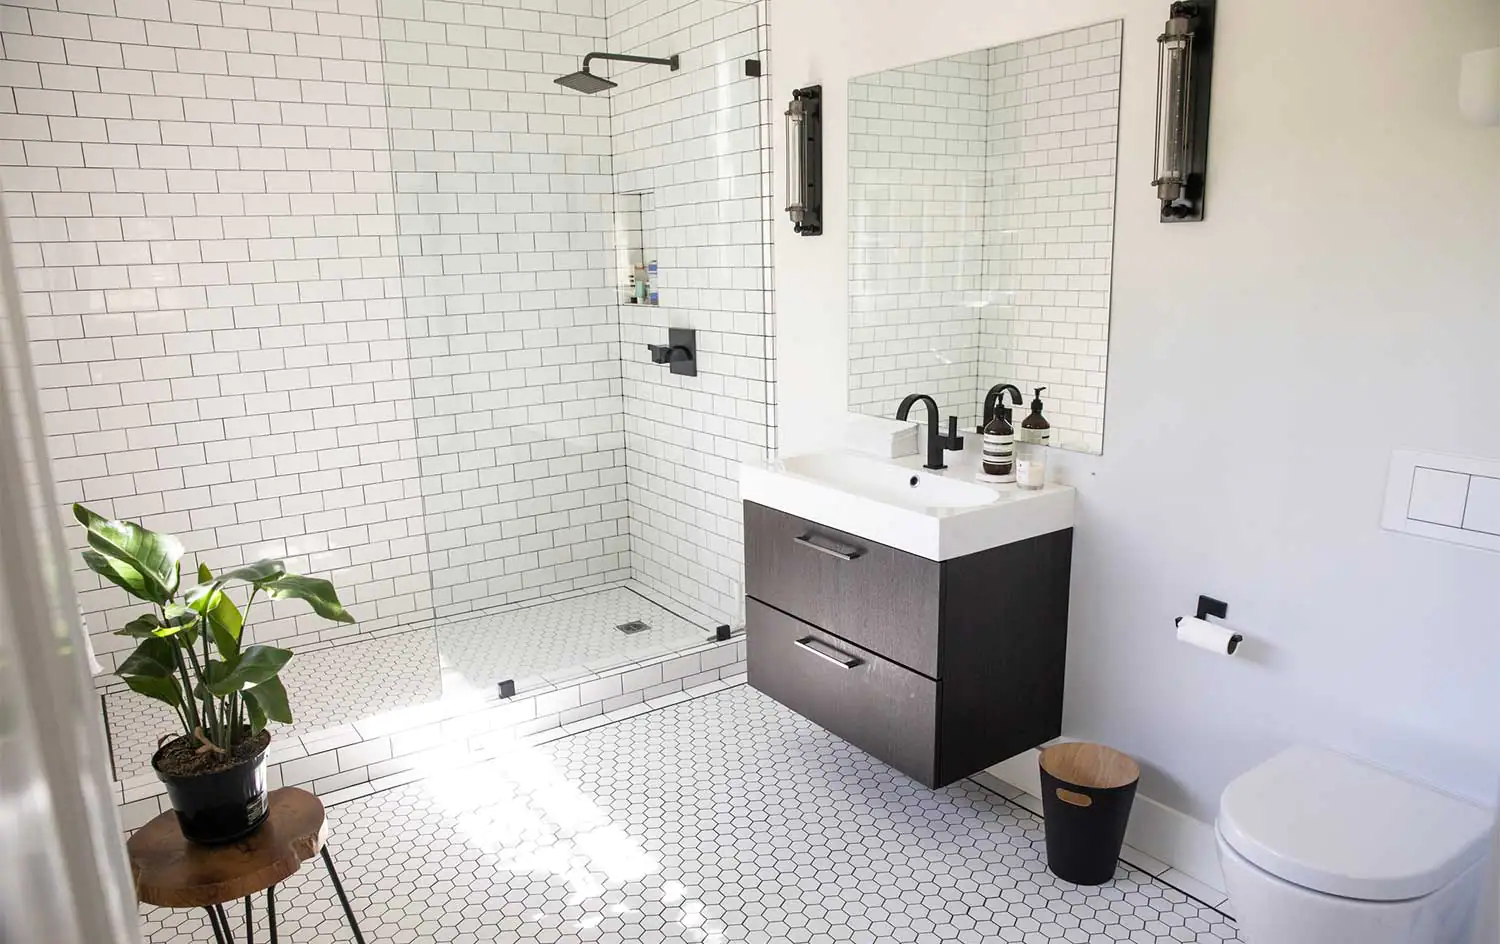 How to Update Bathroom Tiles on a Budget